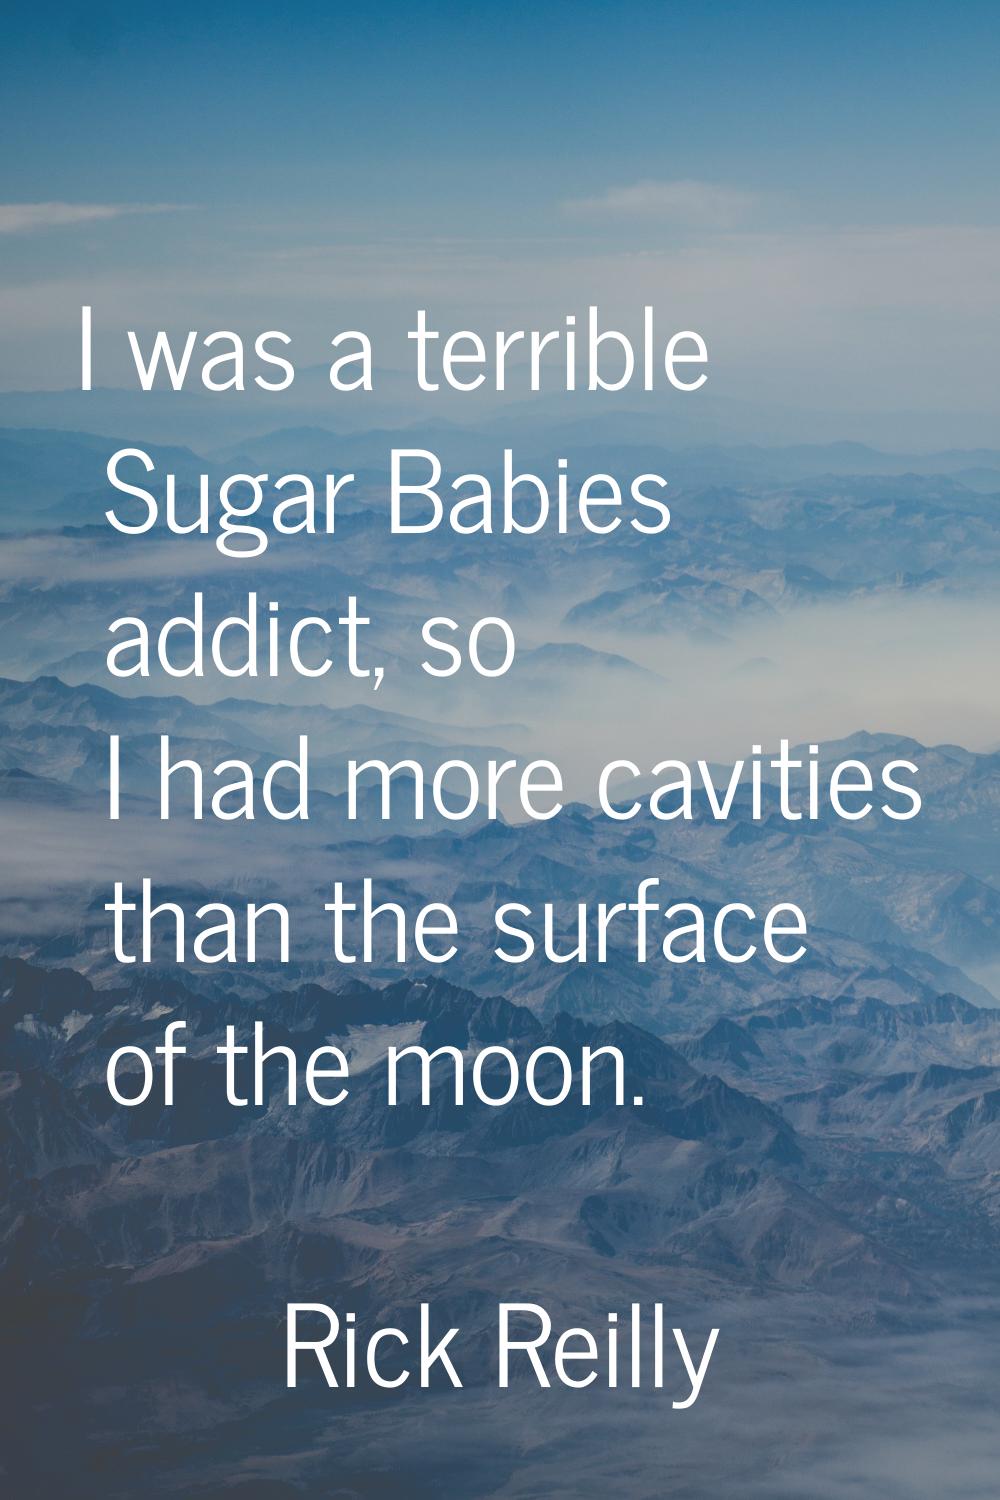 I was a terrible Sugar Babies addict, so I had more cavities than the surface of the moon.